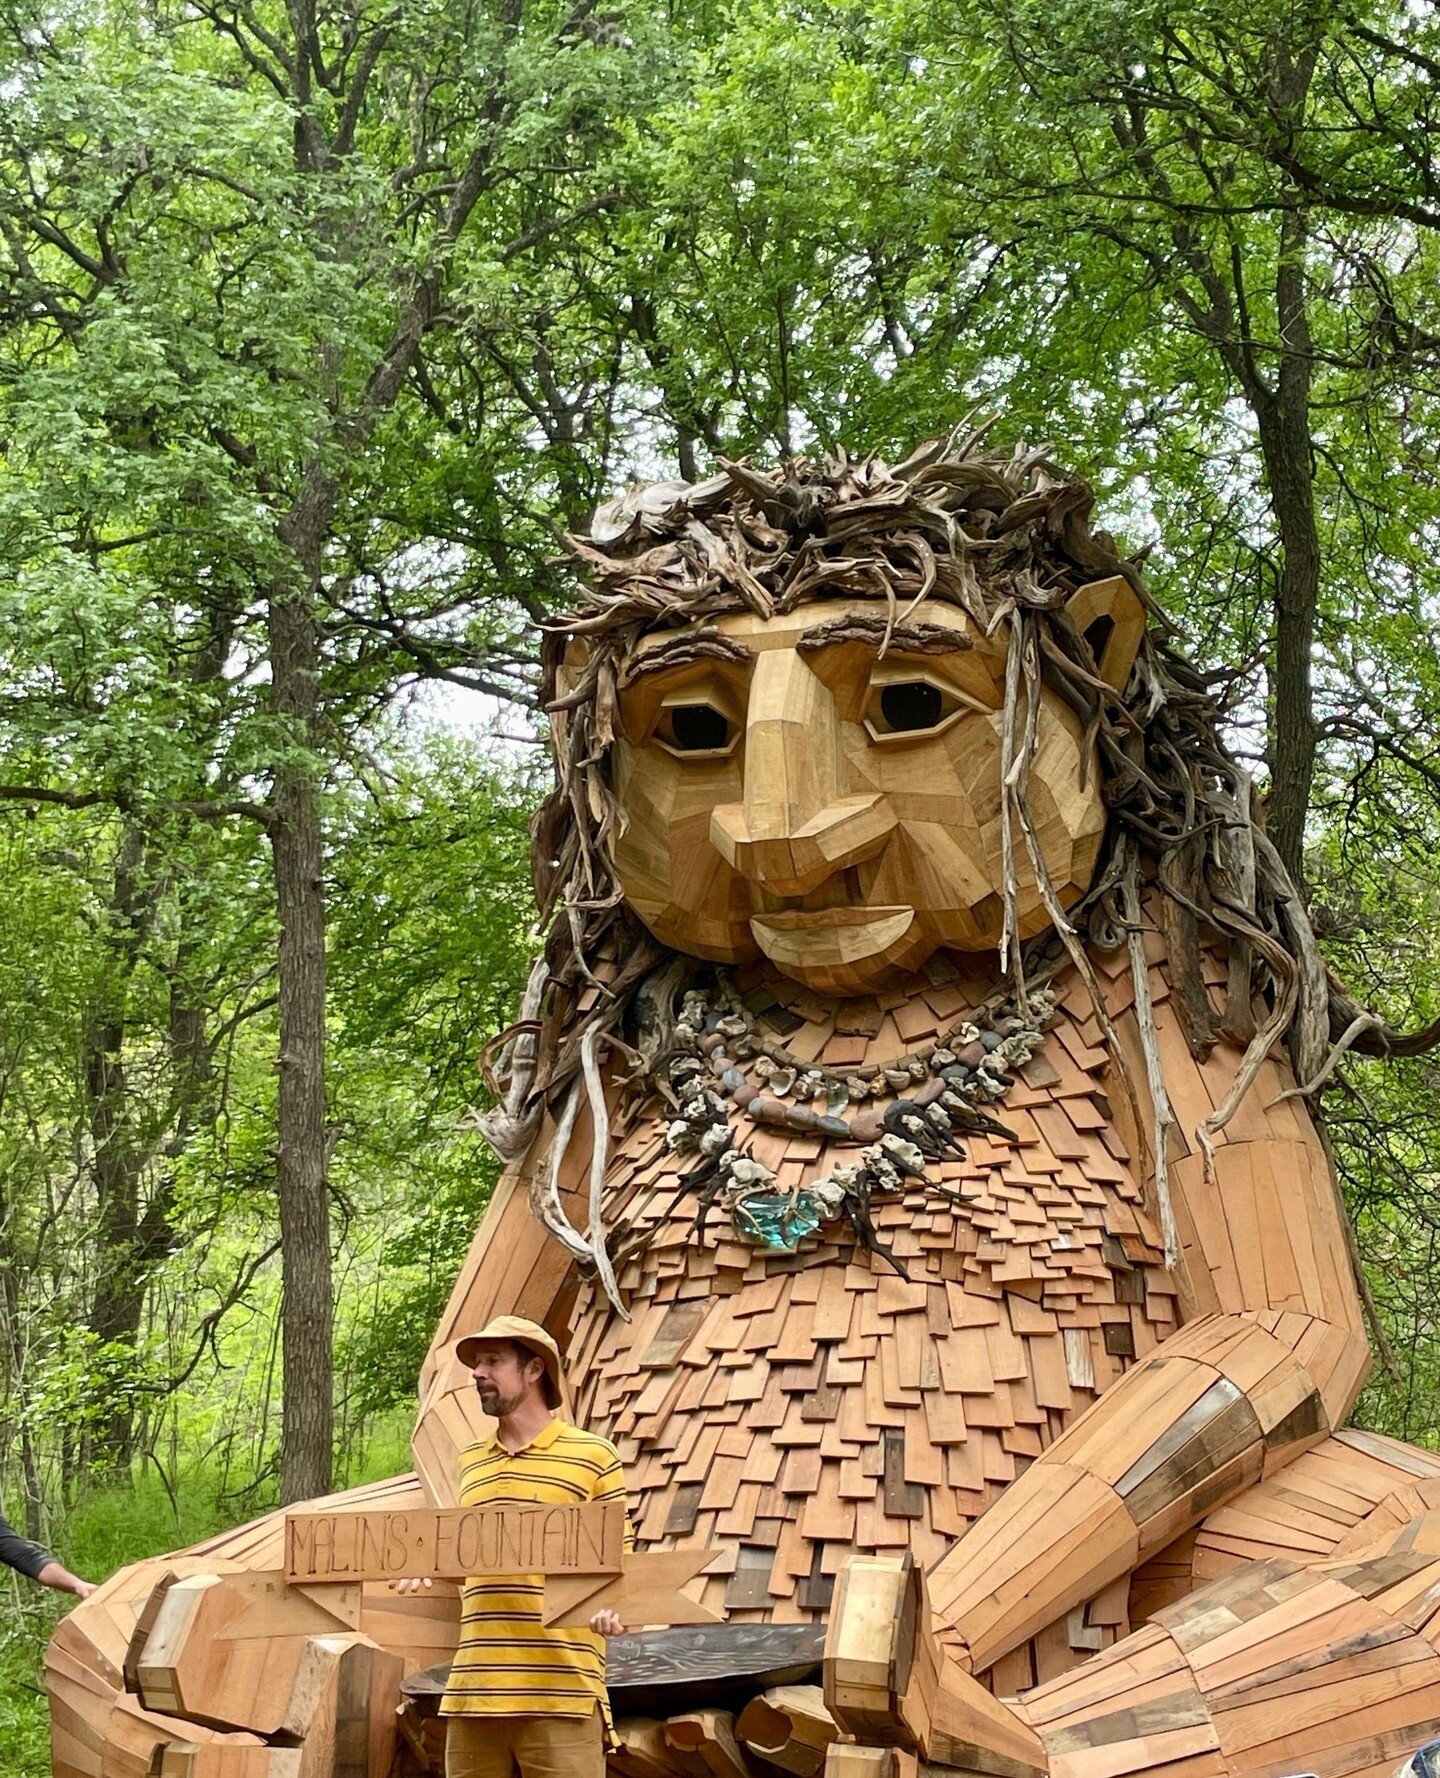 Meet Malin, Pease Park&rsquo;s newest art installation and the first Thomas Dambo troll sculpture in Texas!⁠
⁠
We had so much fun at the recent unveiling ceremony where the name of the whimsical troll was revealed. It was wonderful to see how a publi